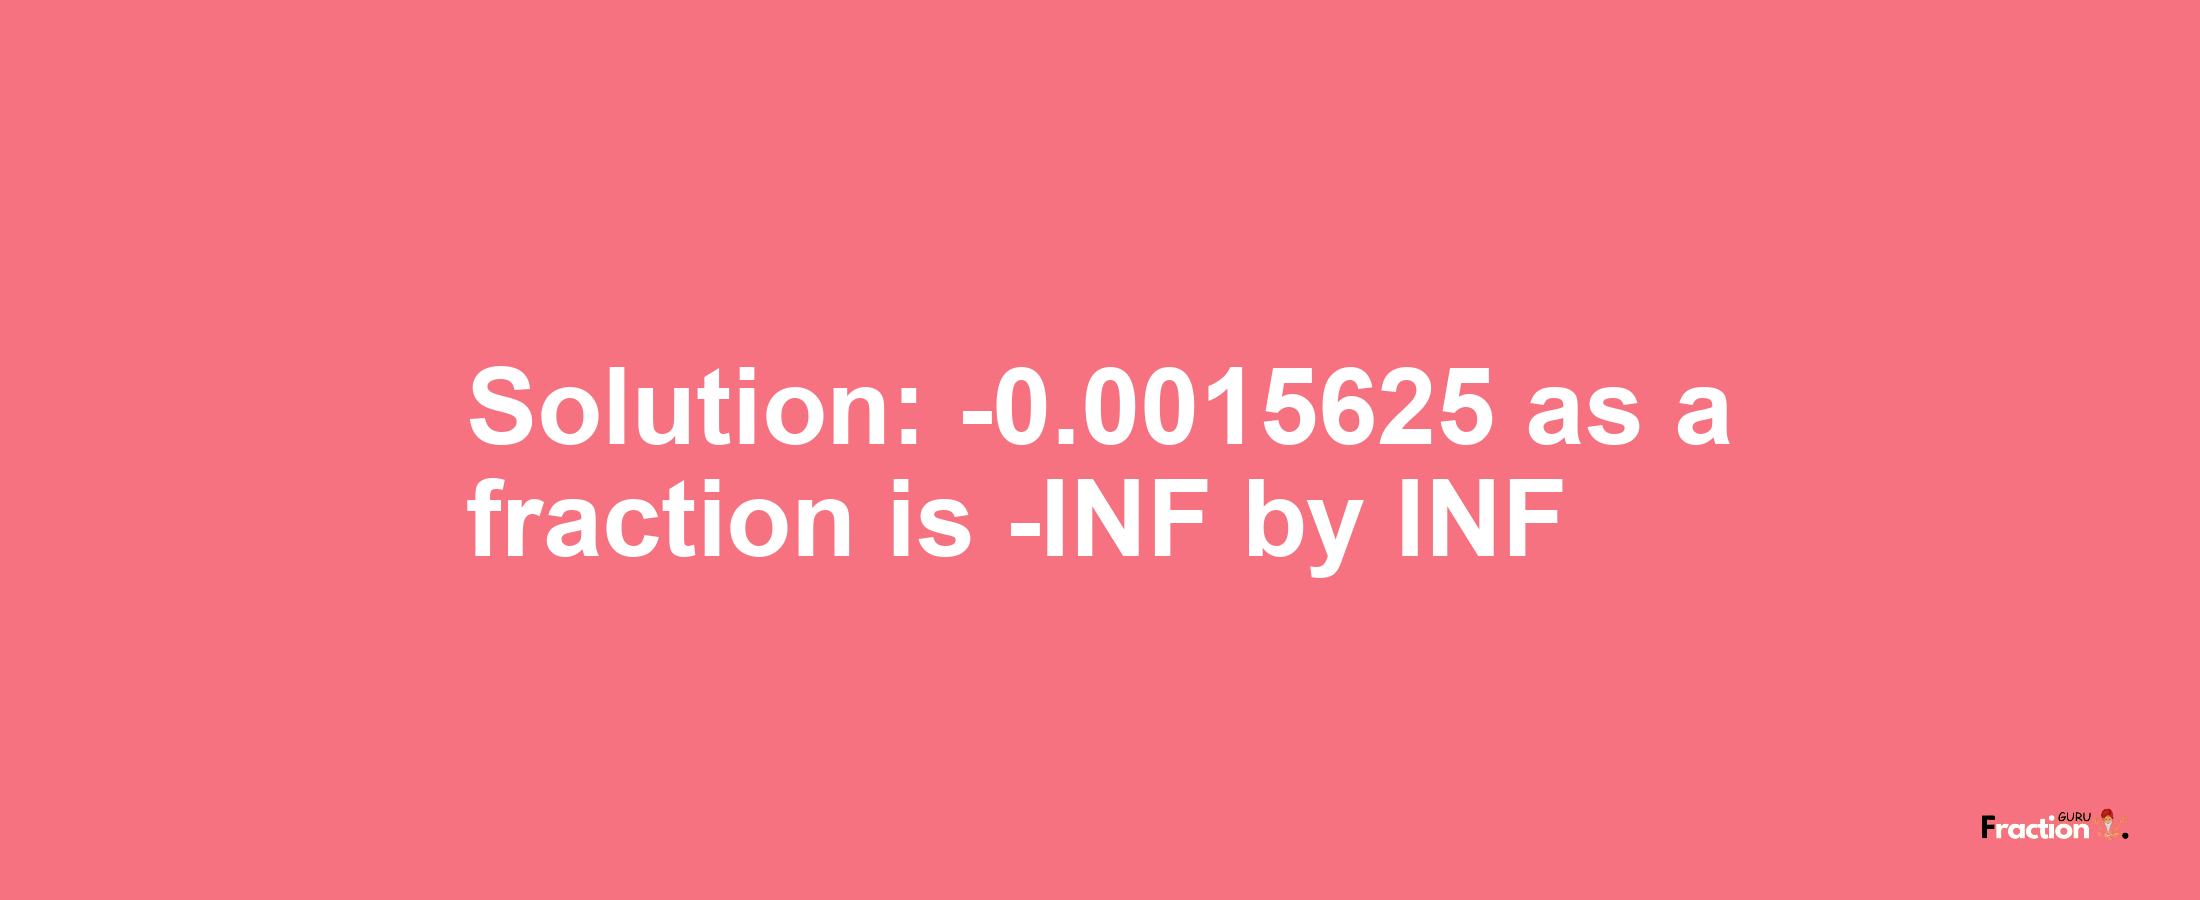 Solution:-0.0015625 as a fraction is -INF/INF